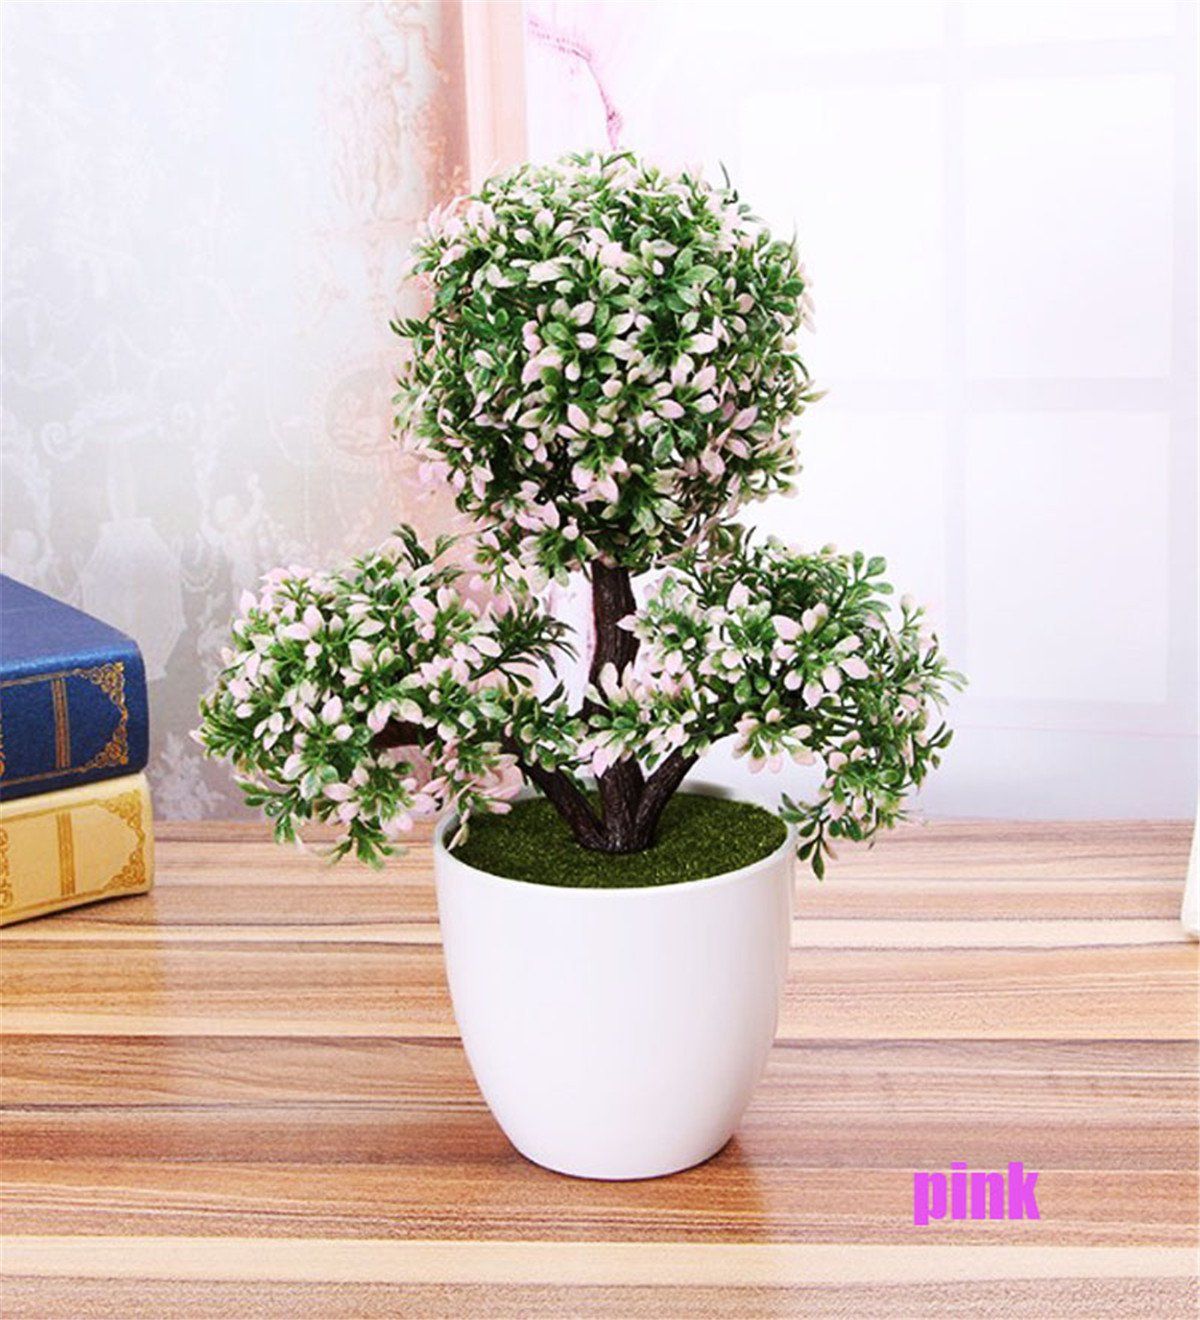 Round shaped leaves of indoor bonsai tree planted in a tall rounded white pot